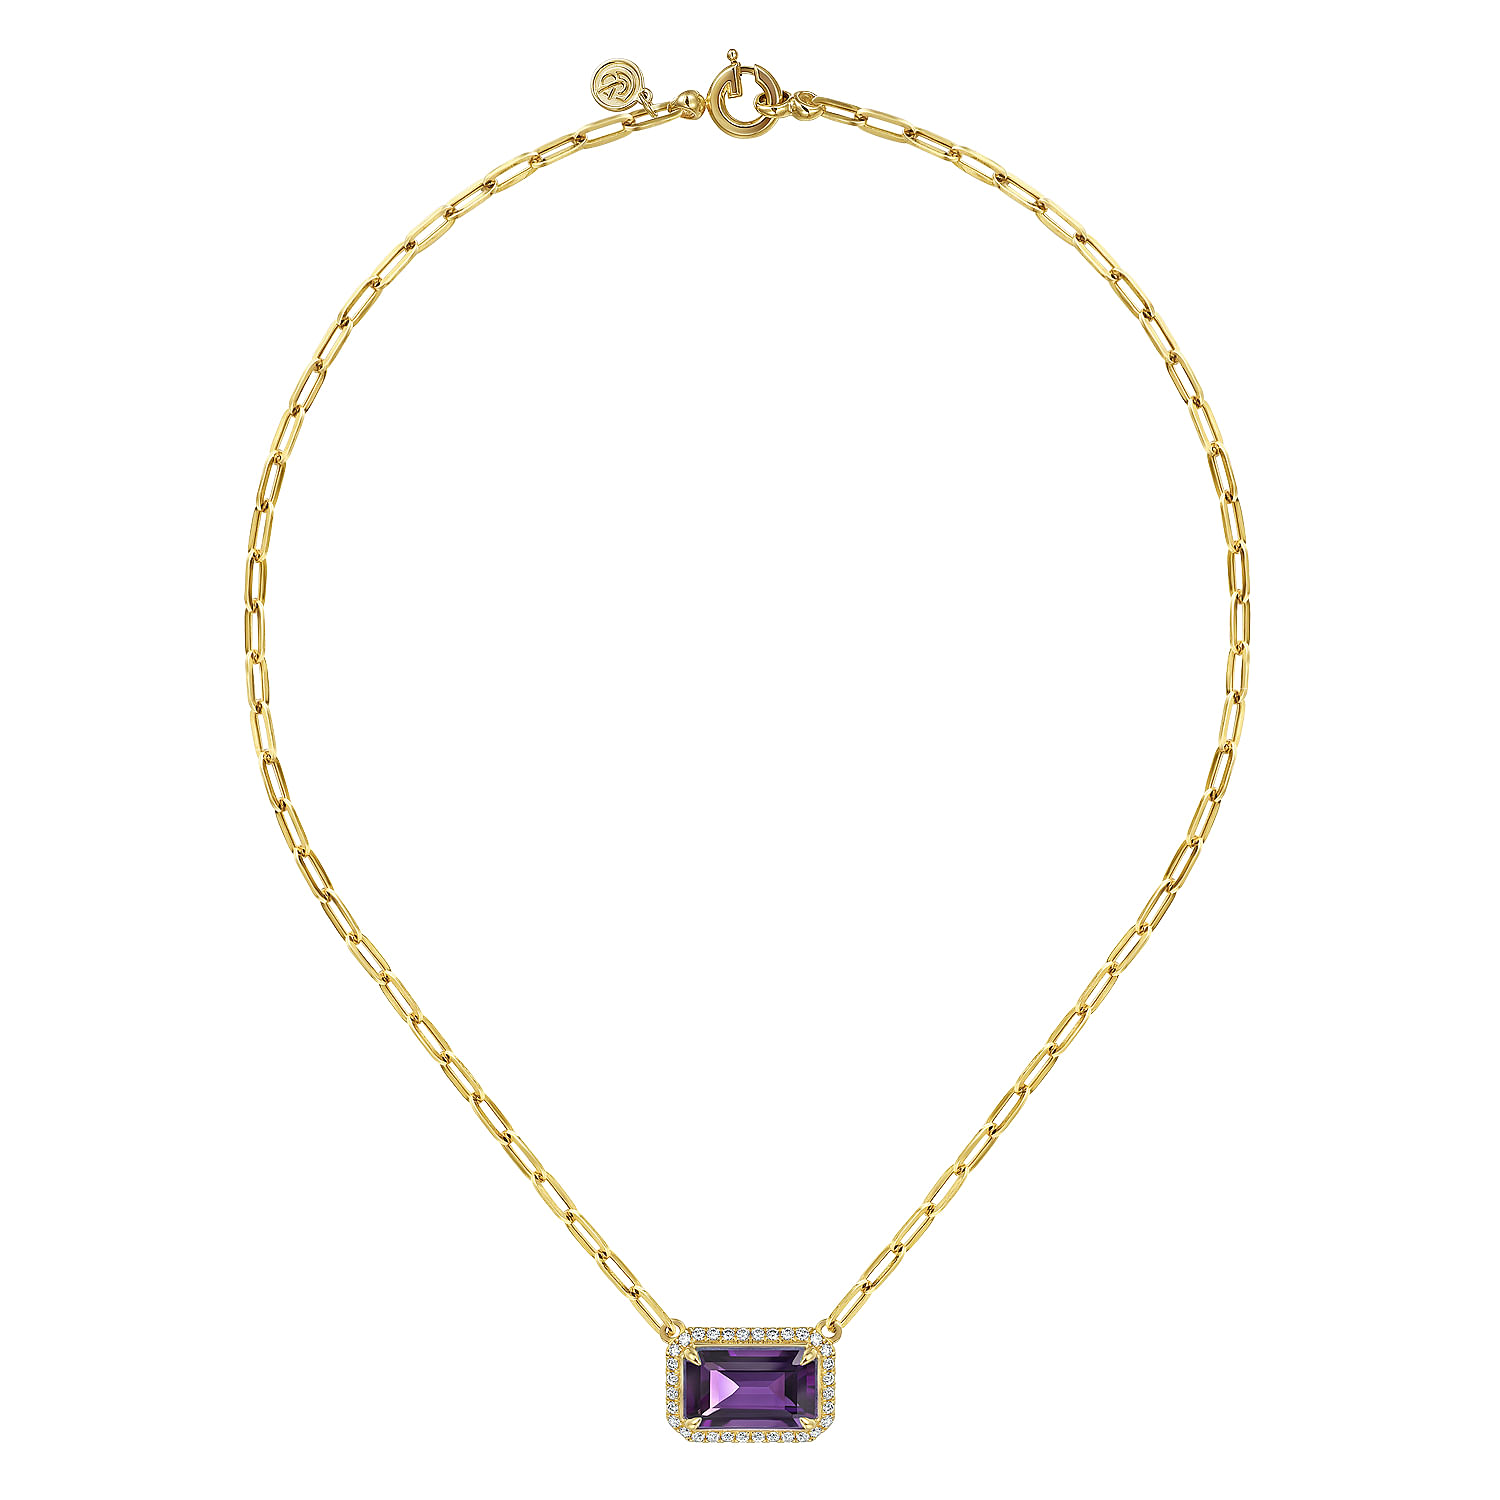 14K Yellow Gold Diamond and Amethyst Emerald Cut Necklace With Flower Pattern Gallery